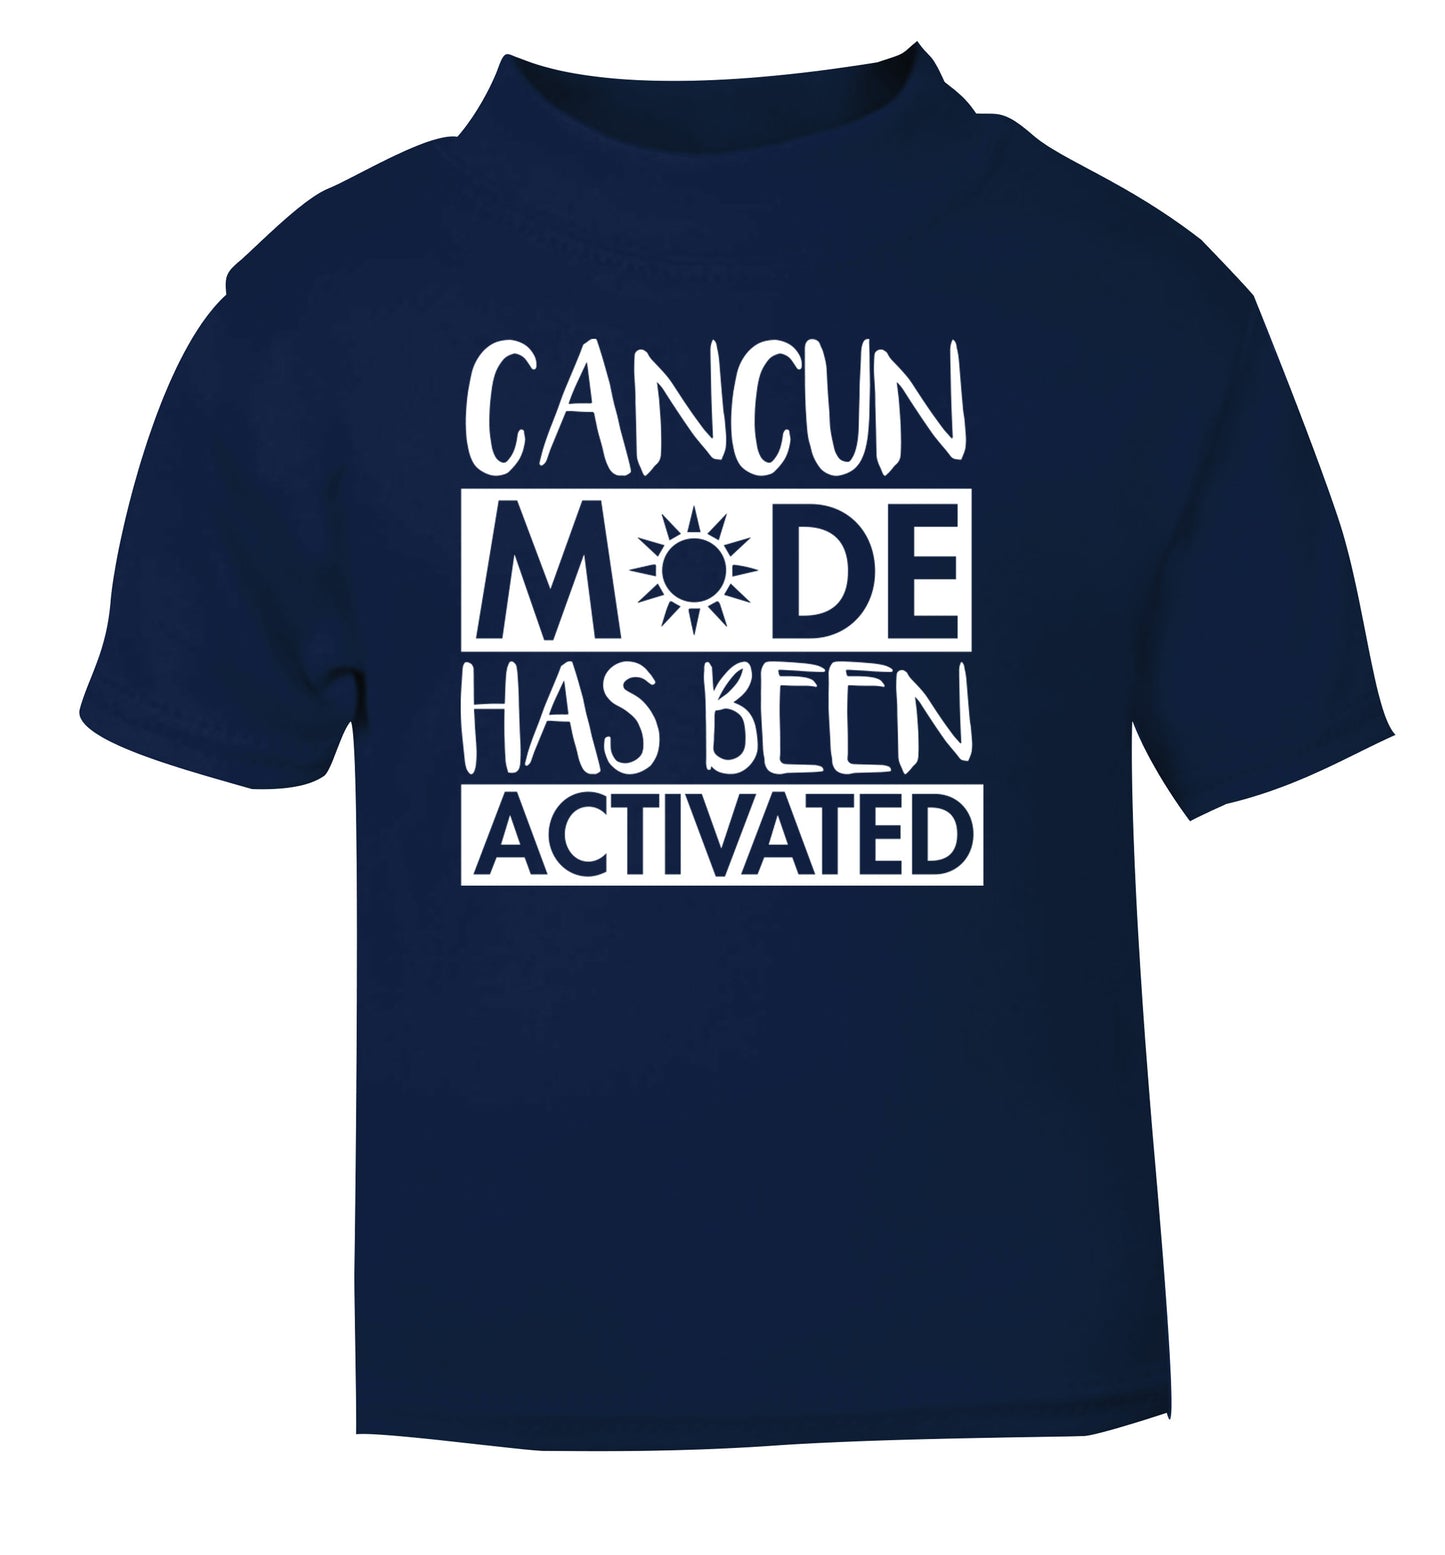 Cancun mode has been activated navy Baby Toddler Tshirt 2 Years